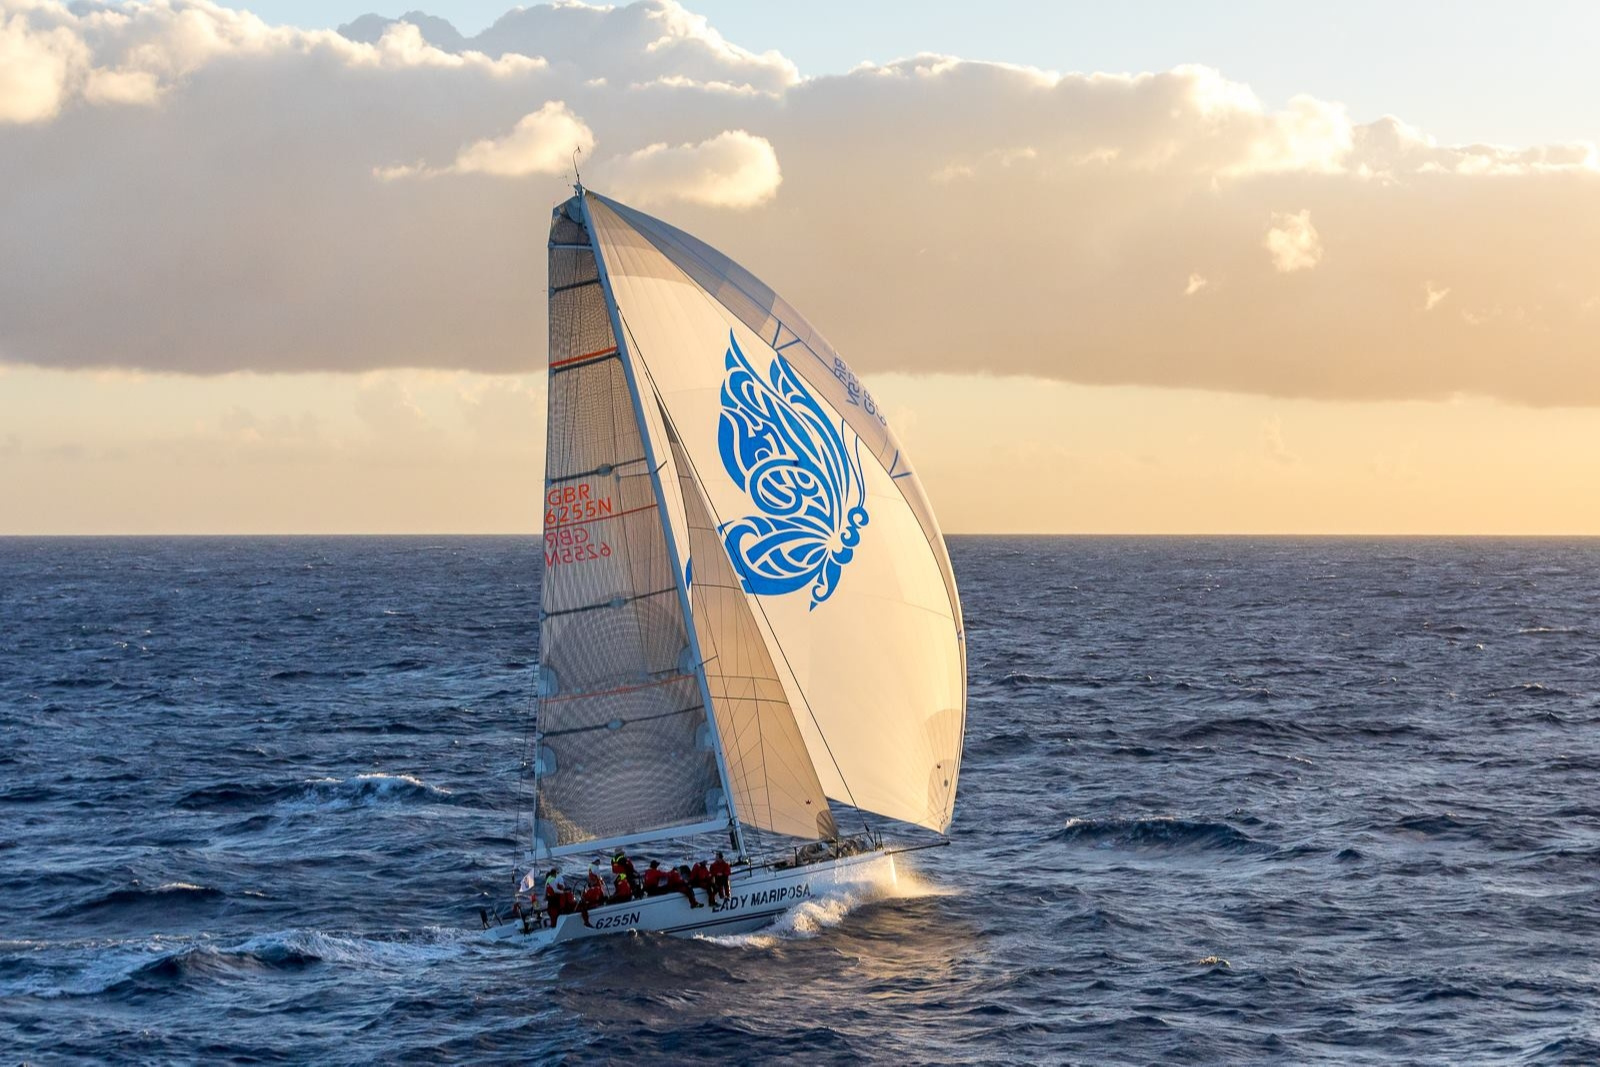 British «butterfly» Ker 46 Lady Mariposa came to the finish seventh among monotypes. Taking into account the handicap, the team's result of 78 hours, 31 minutes and 59 seconds is the third in the IRC Overall ranking.